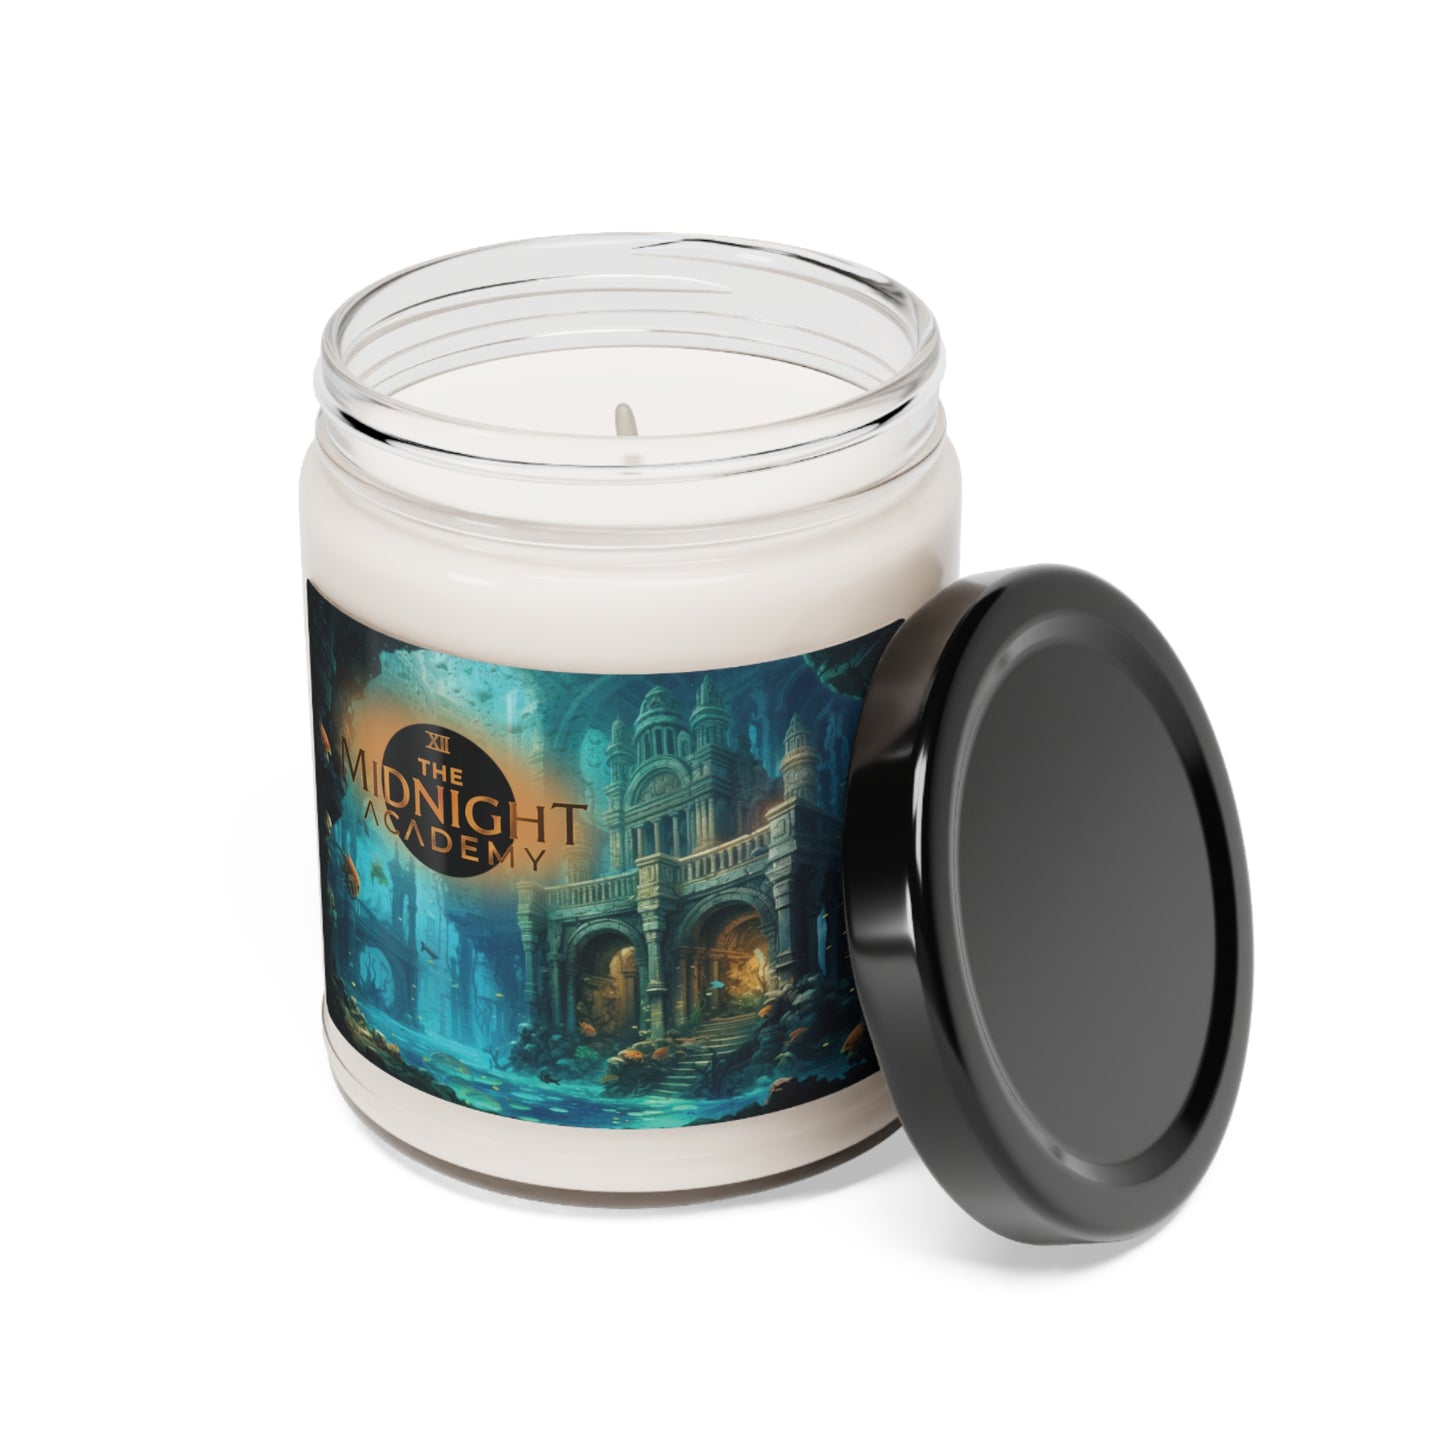 Atlantis Whisper - Aquatic Floral Scented Soy Candle, 9oz